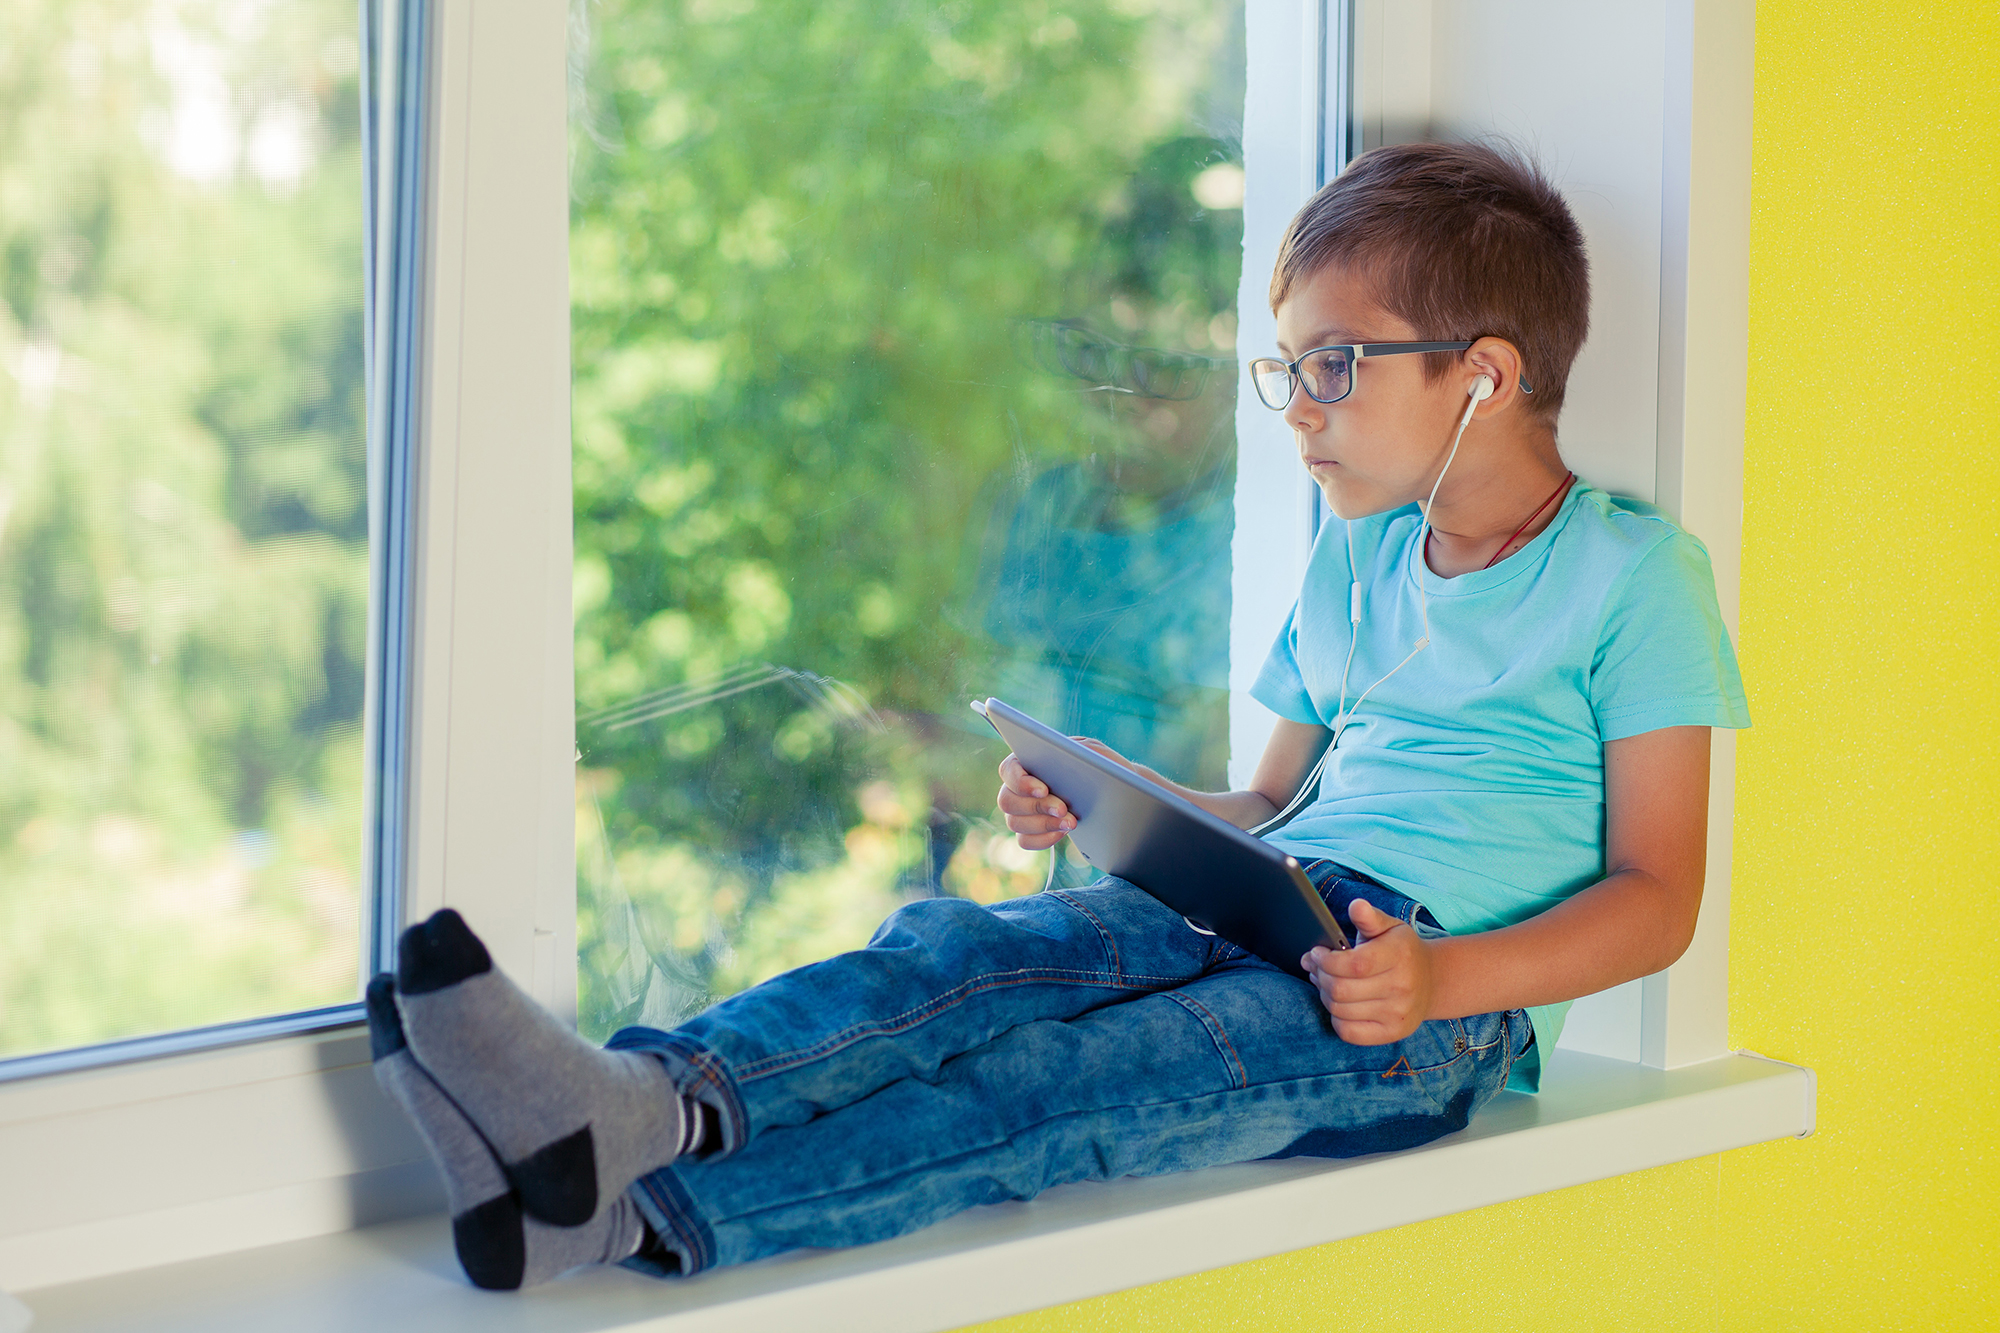 Child listening to an audiobook. (Image: Shutterstock)